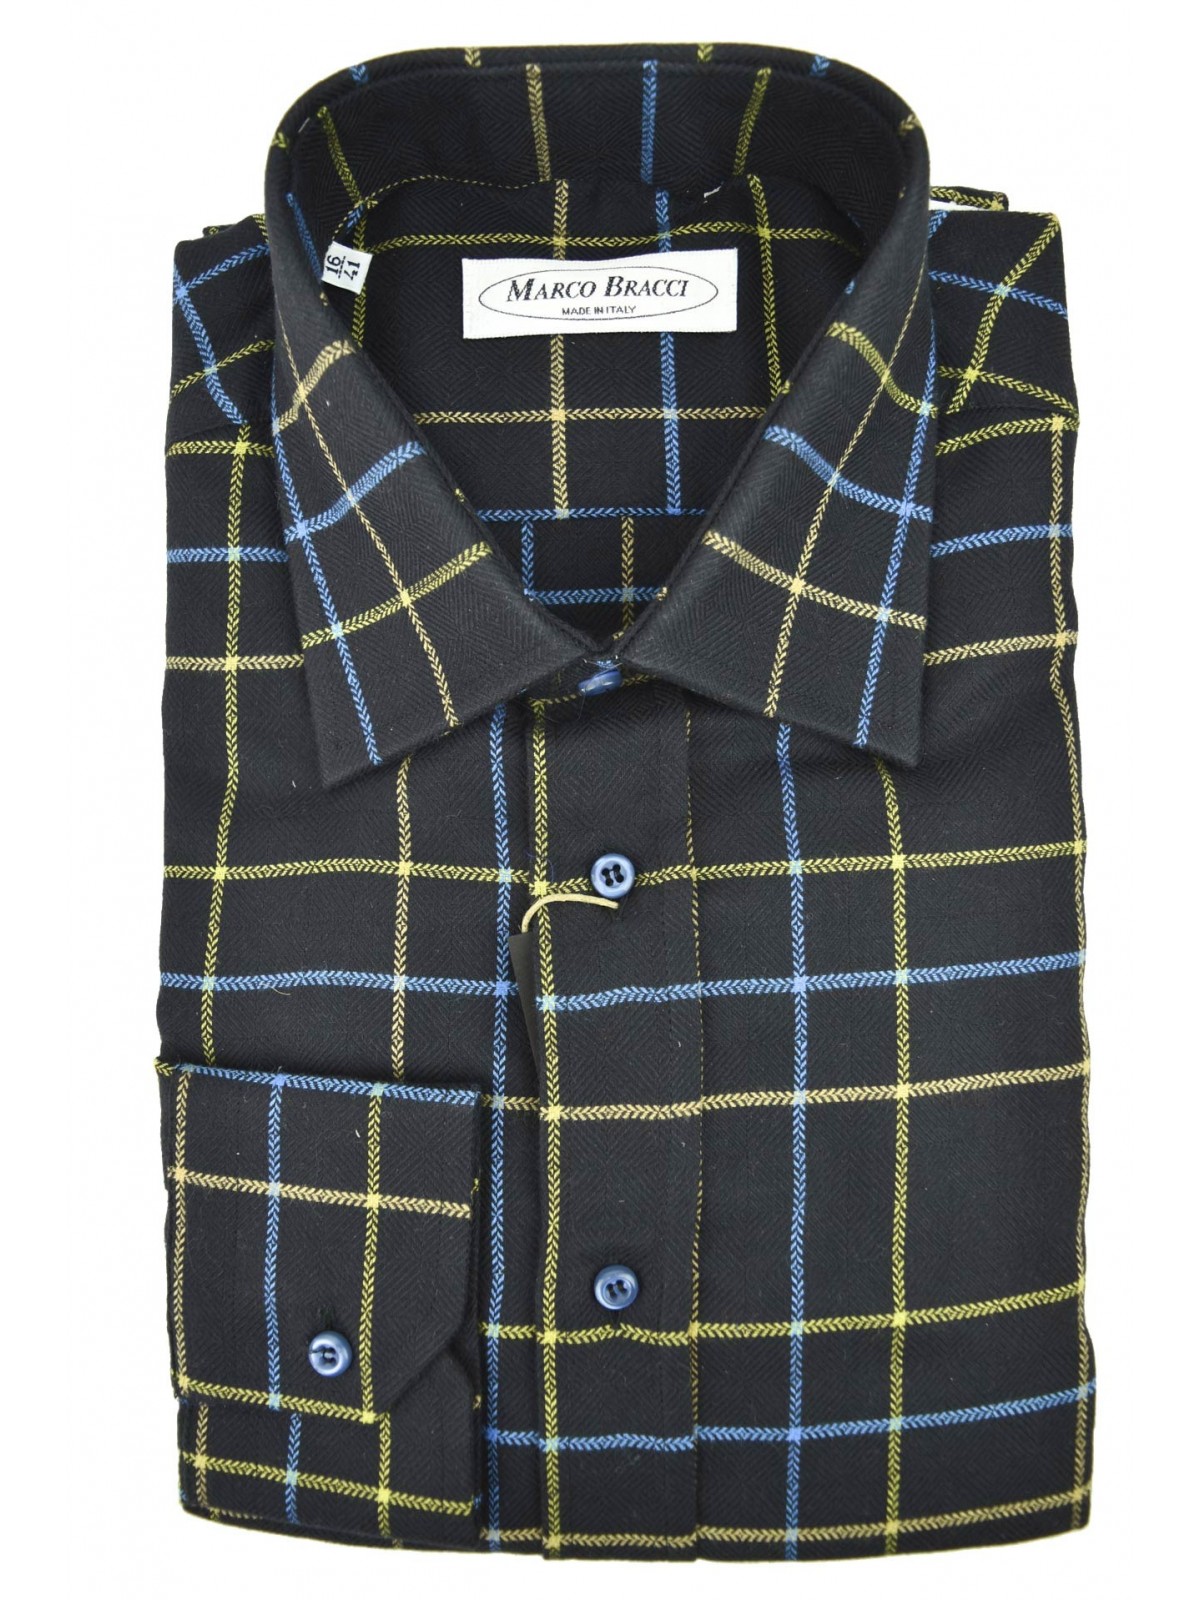 French Man Shirt Blue Yellow Turquoise Checkered